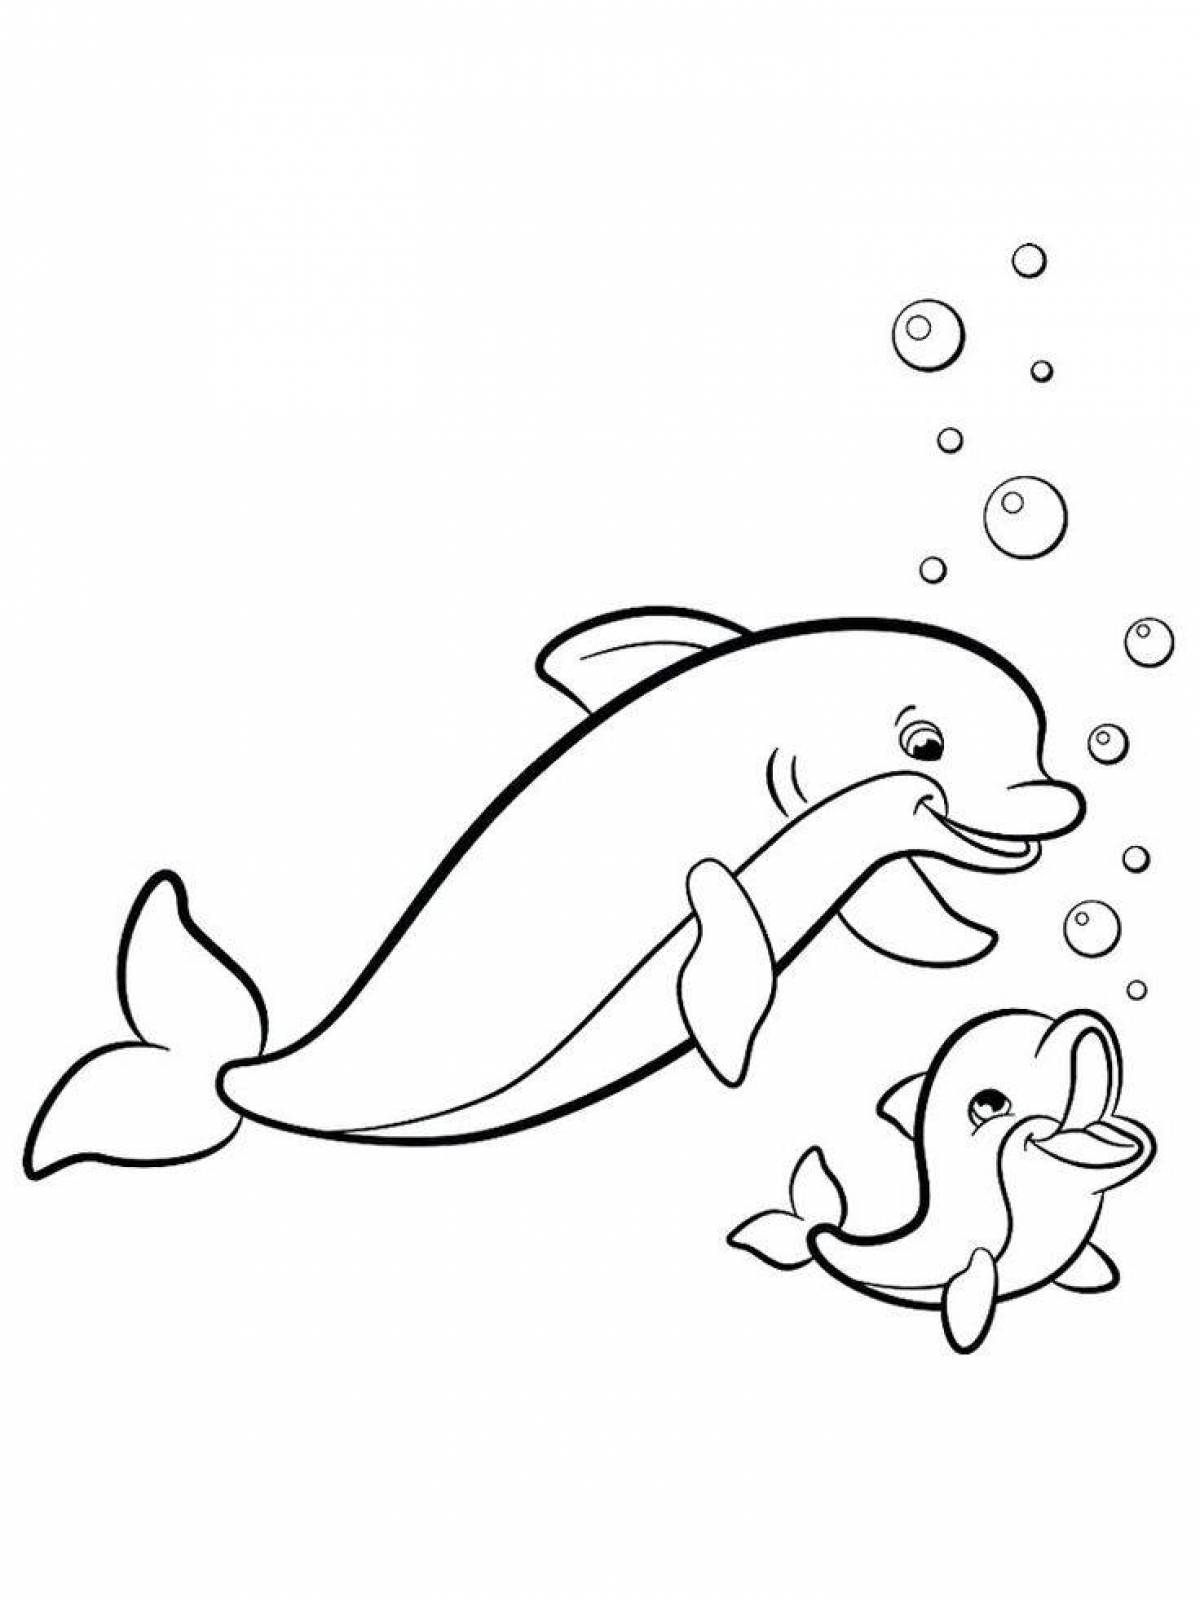 Cute dolphin coloring pages for kids